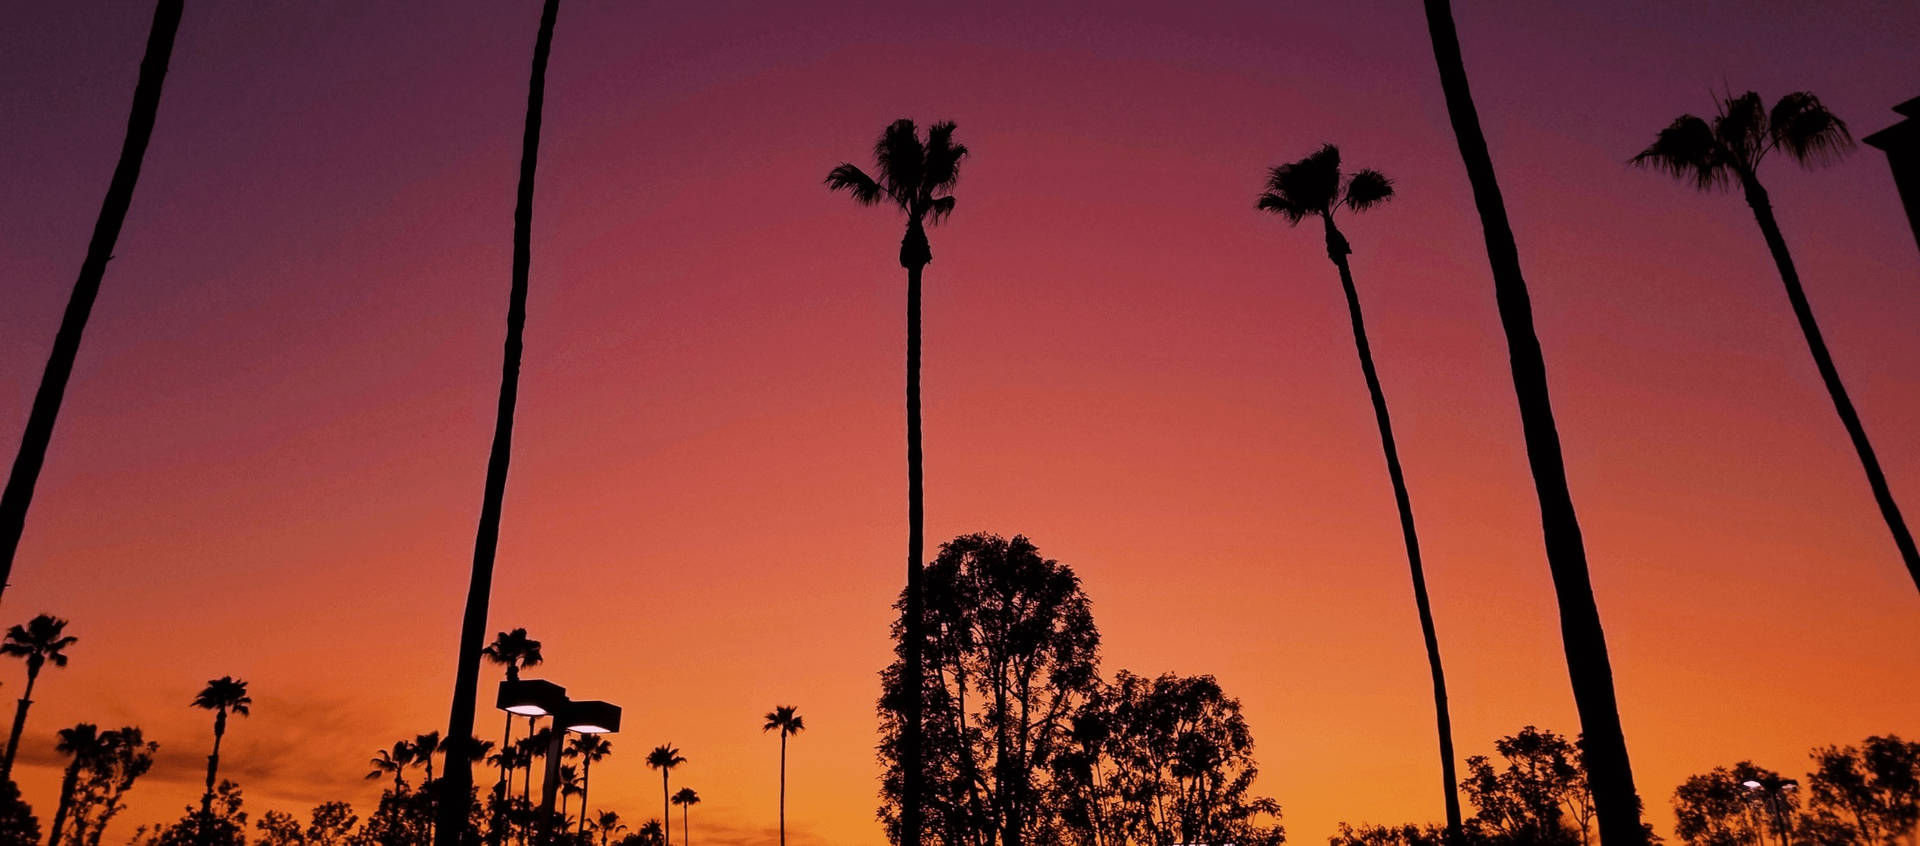 Los Angeles Sunset Over Trees